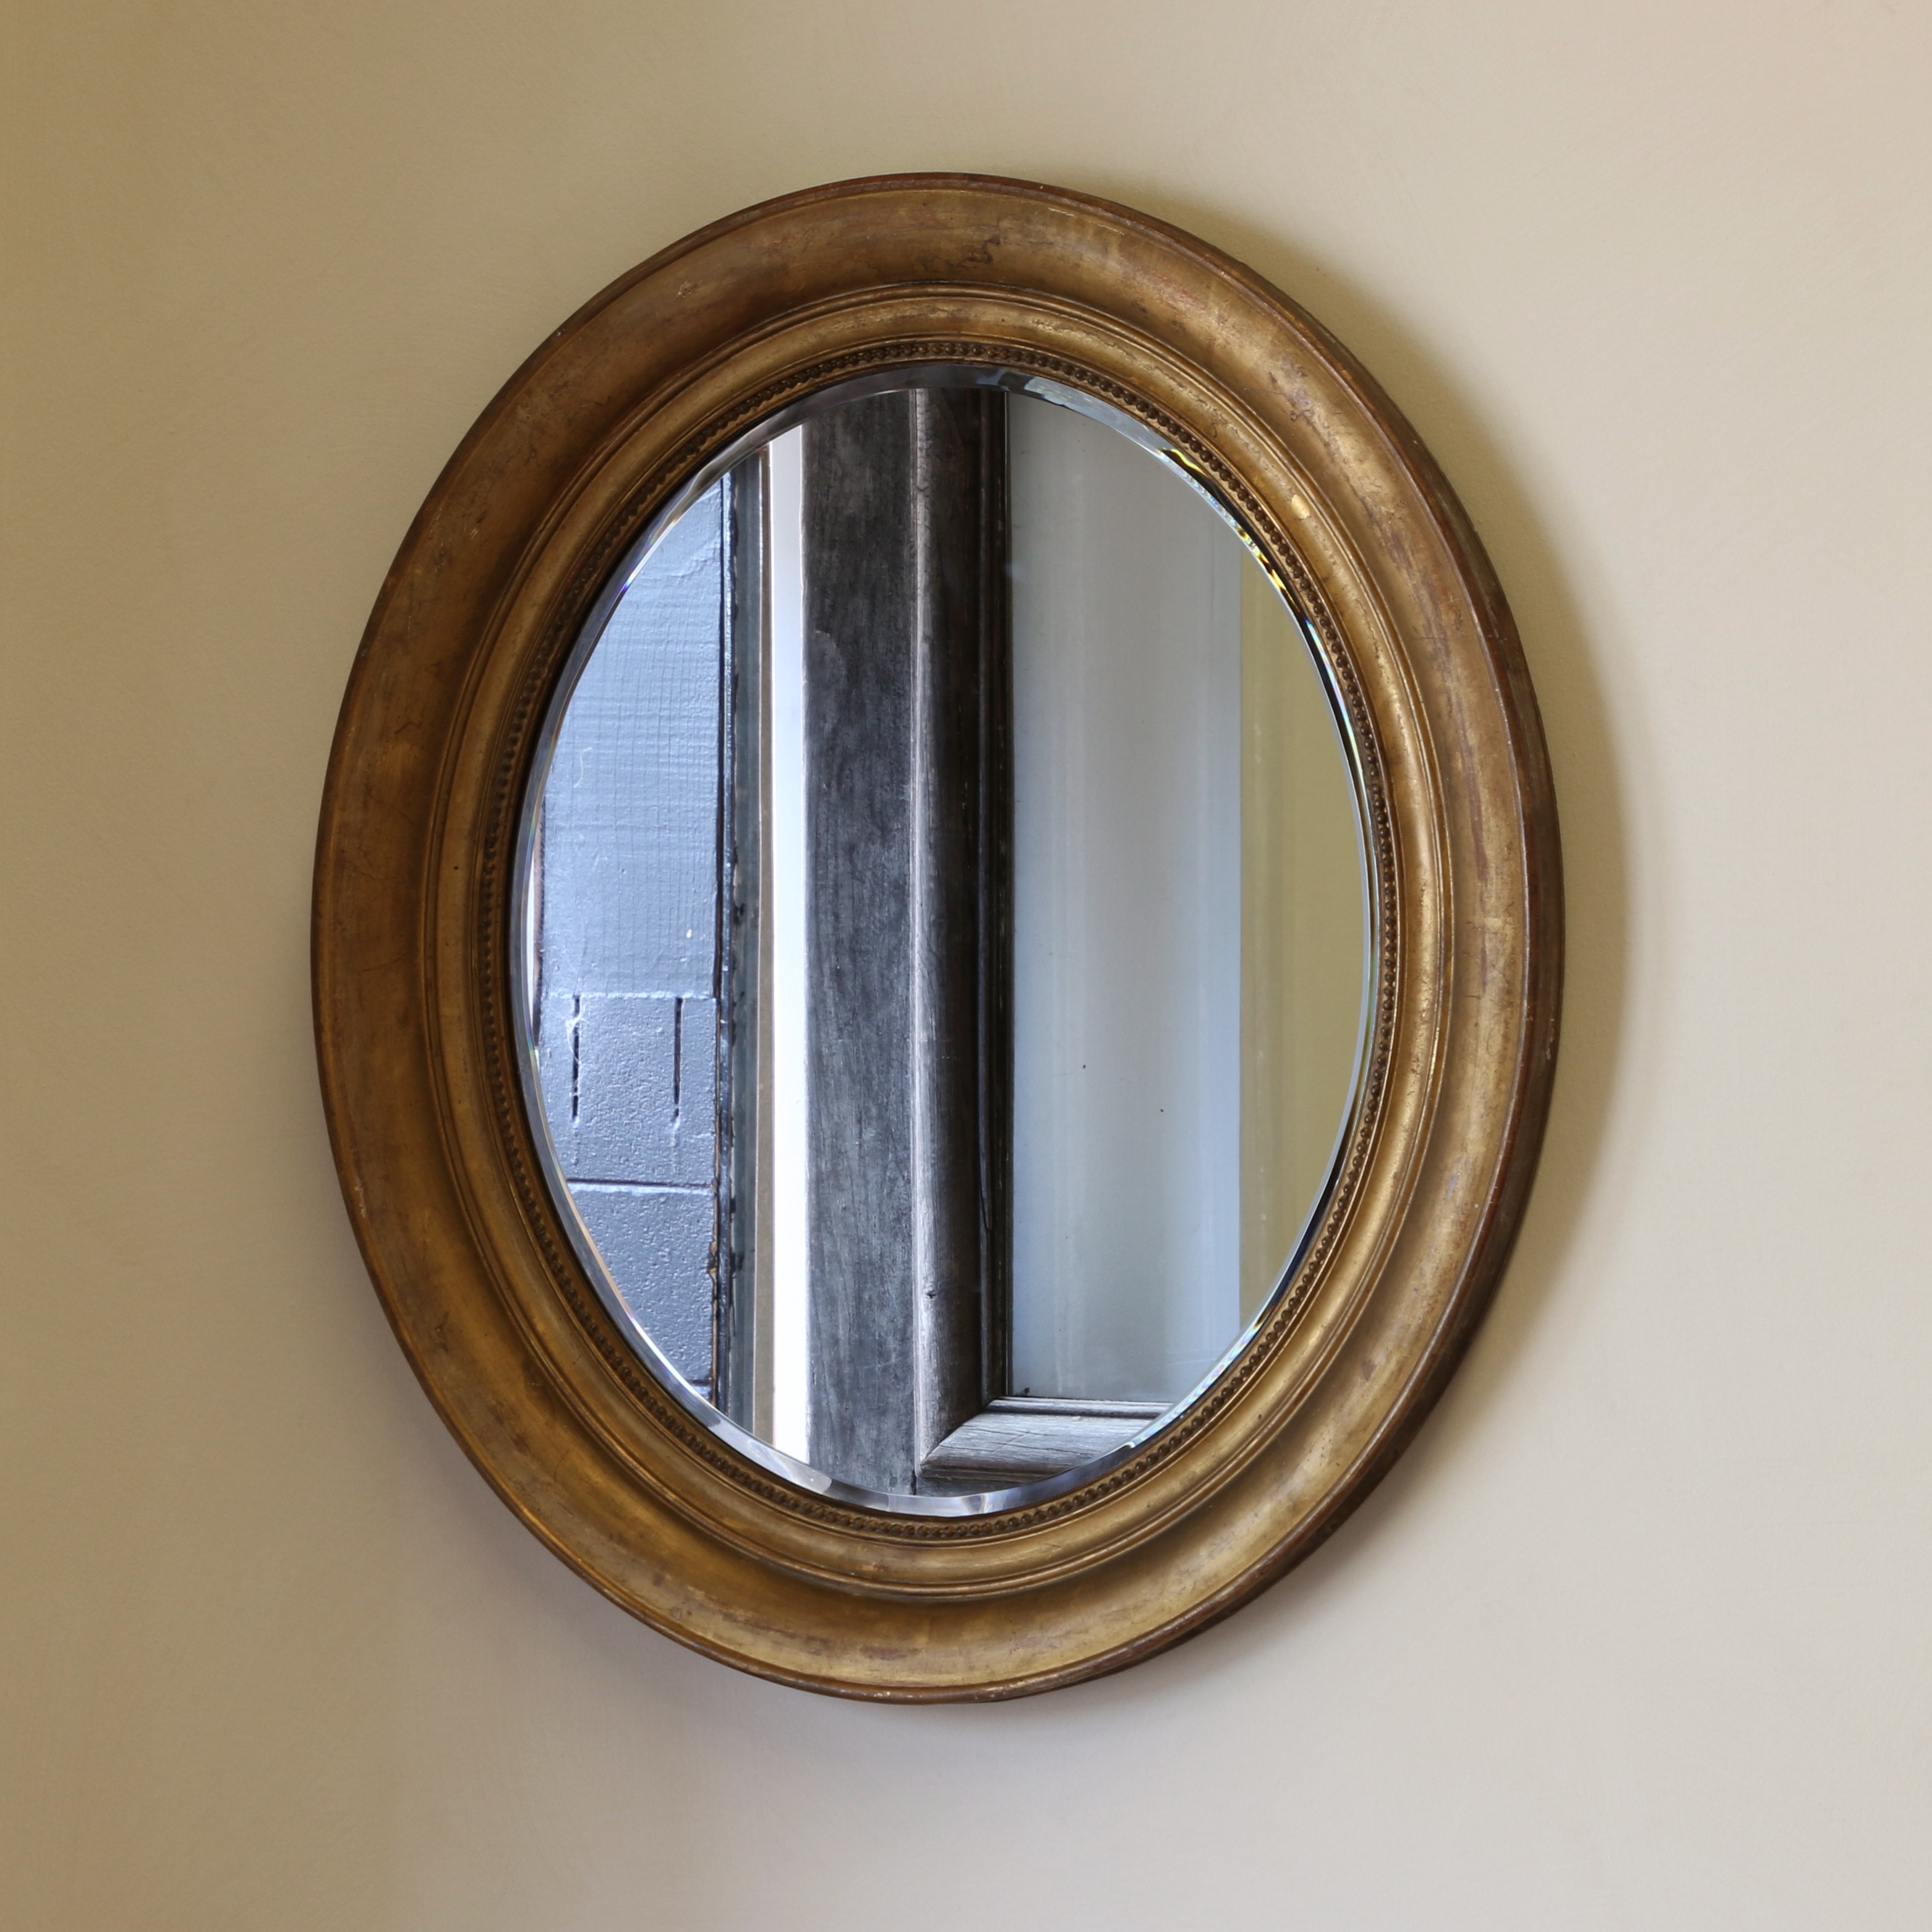 Pair of Oval Mirrors